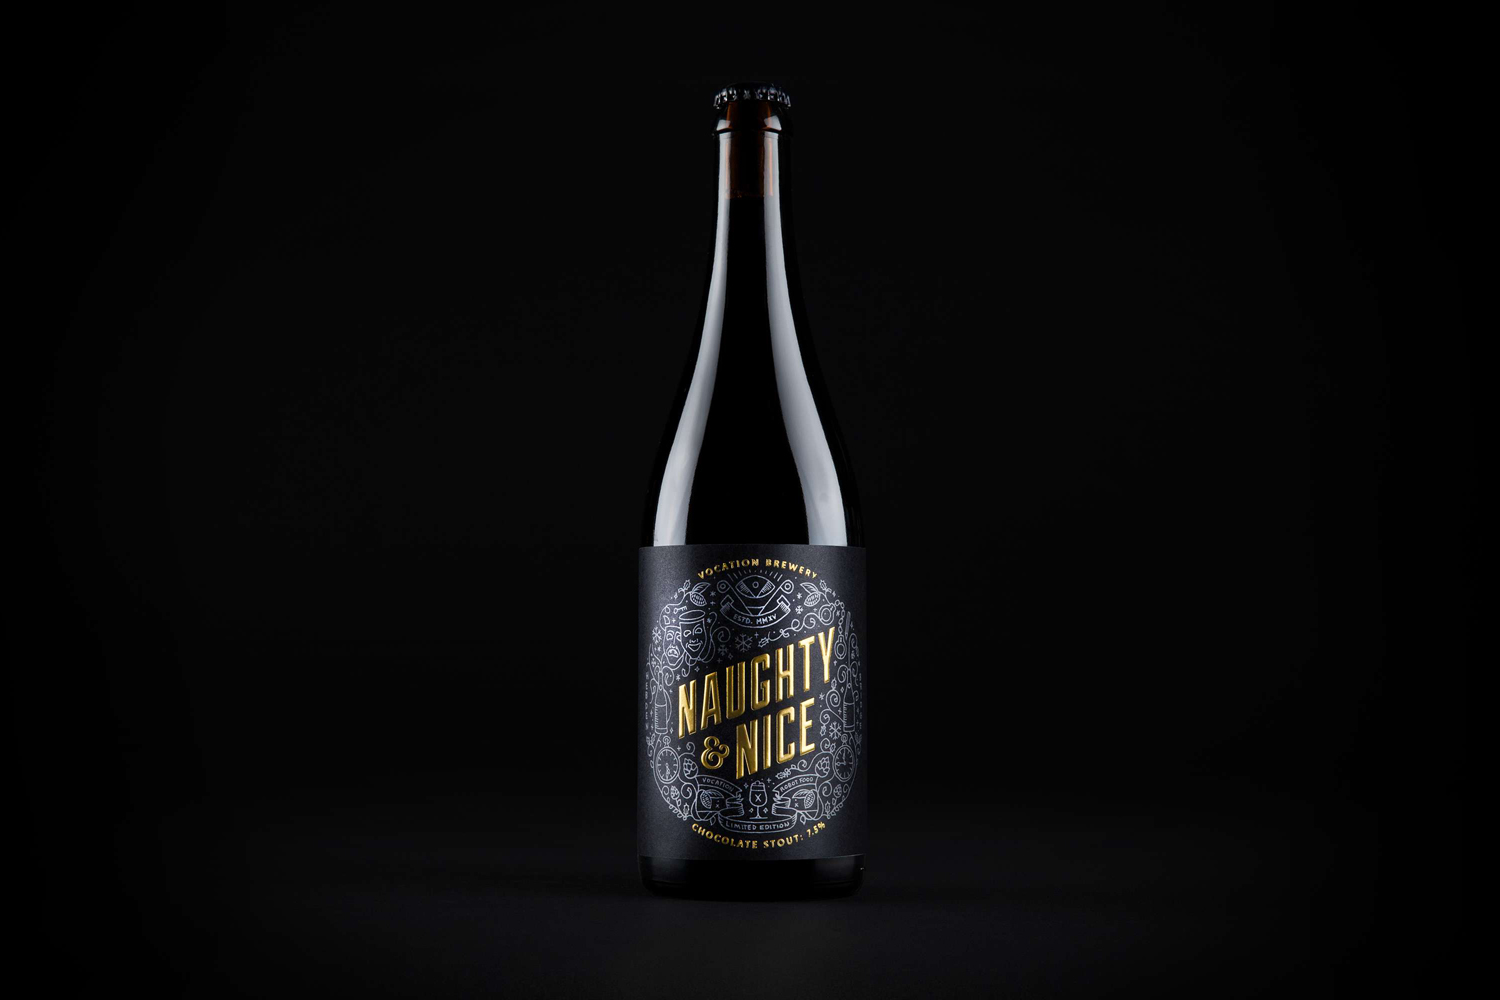 Package design for Vocation Brewery's Limited Edition Christmas Stout by graphic design studio Robot Food, United Kingdom